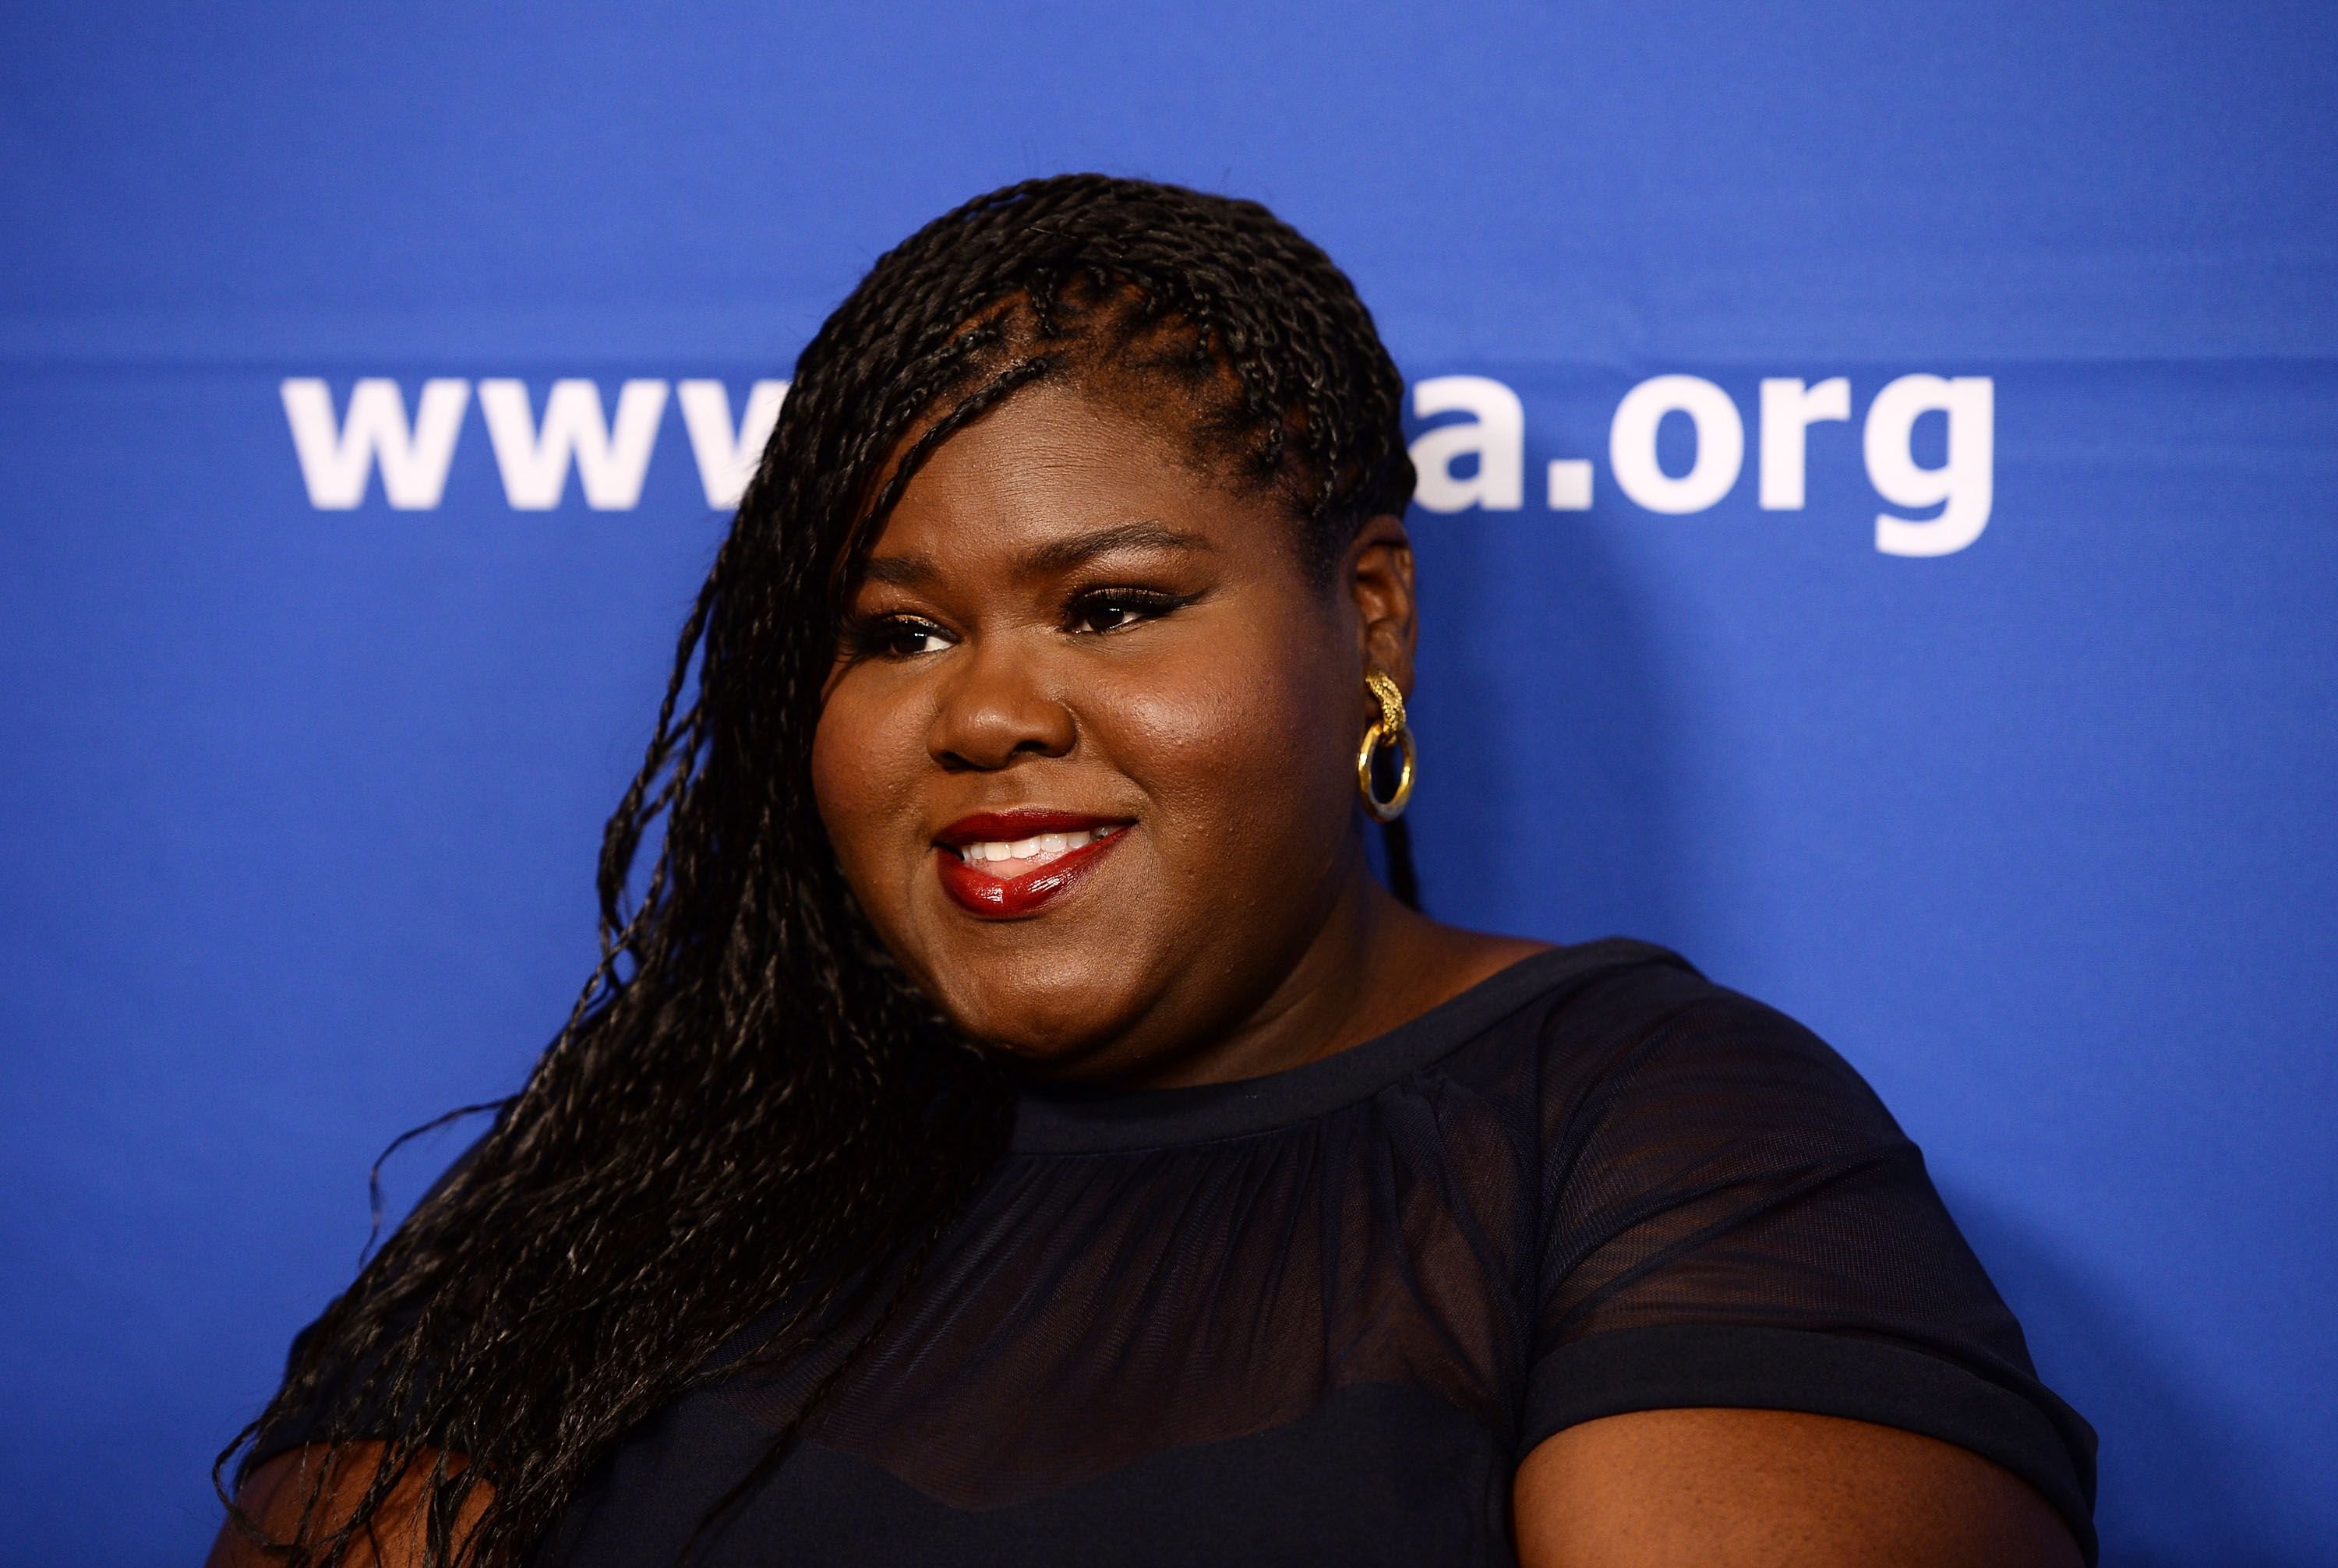 Gabourey Sidibe arrives at the Children's Defense Fund-California's 27th Annual Beat The Odds Awards, in December 2017 | Photo: Getty Images